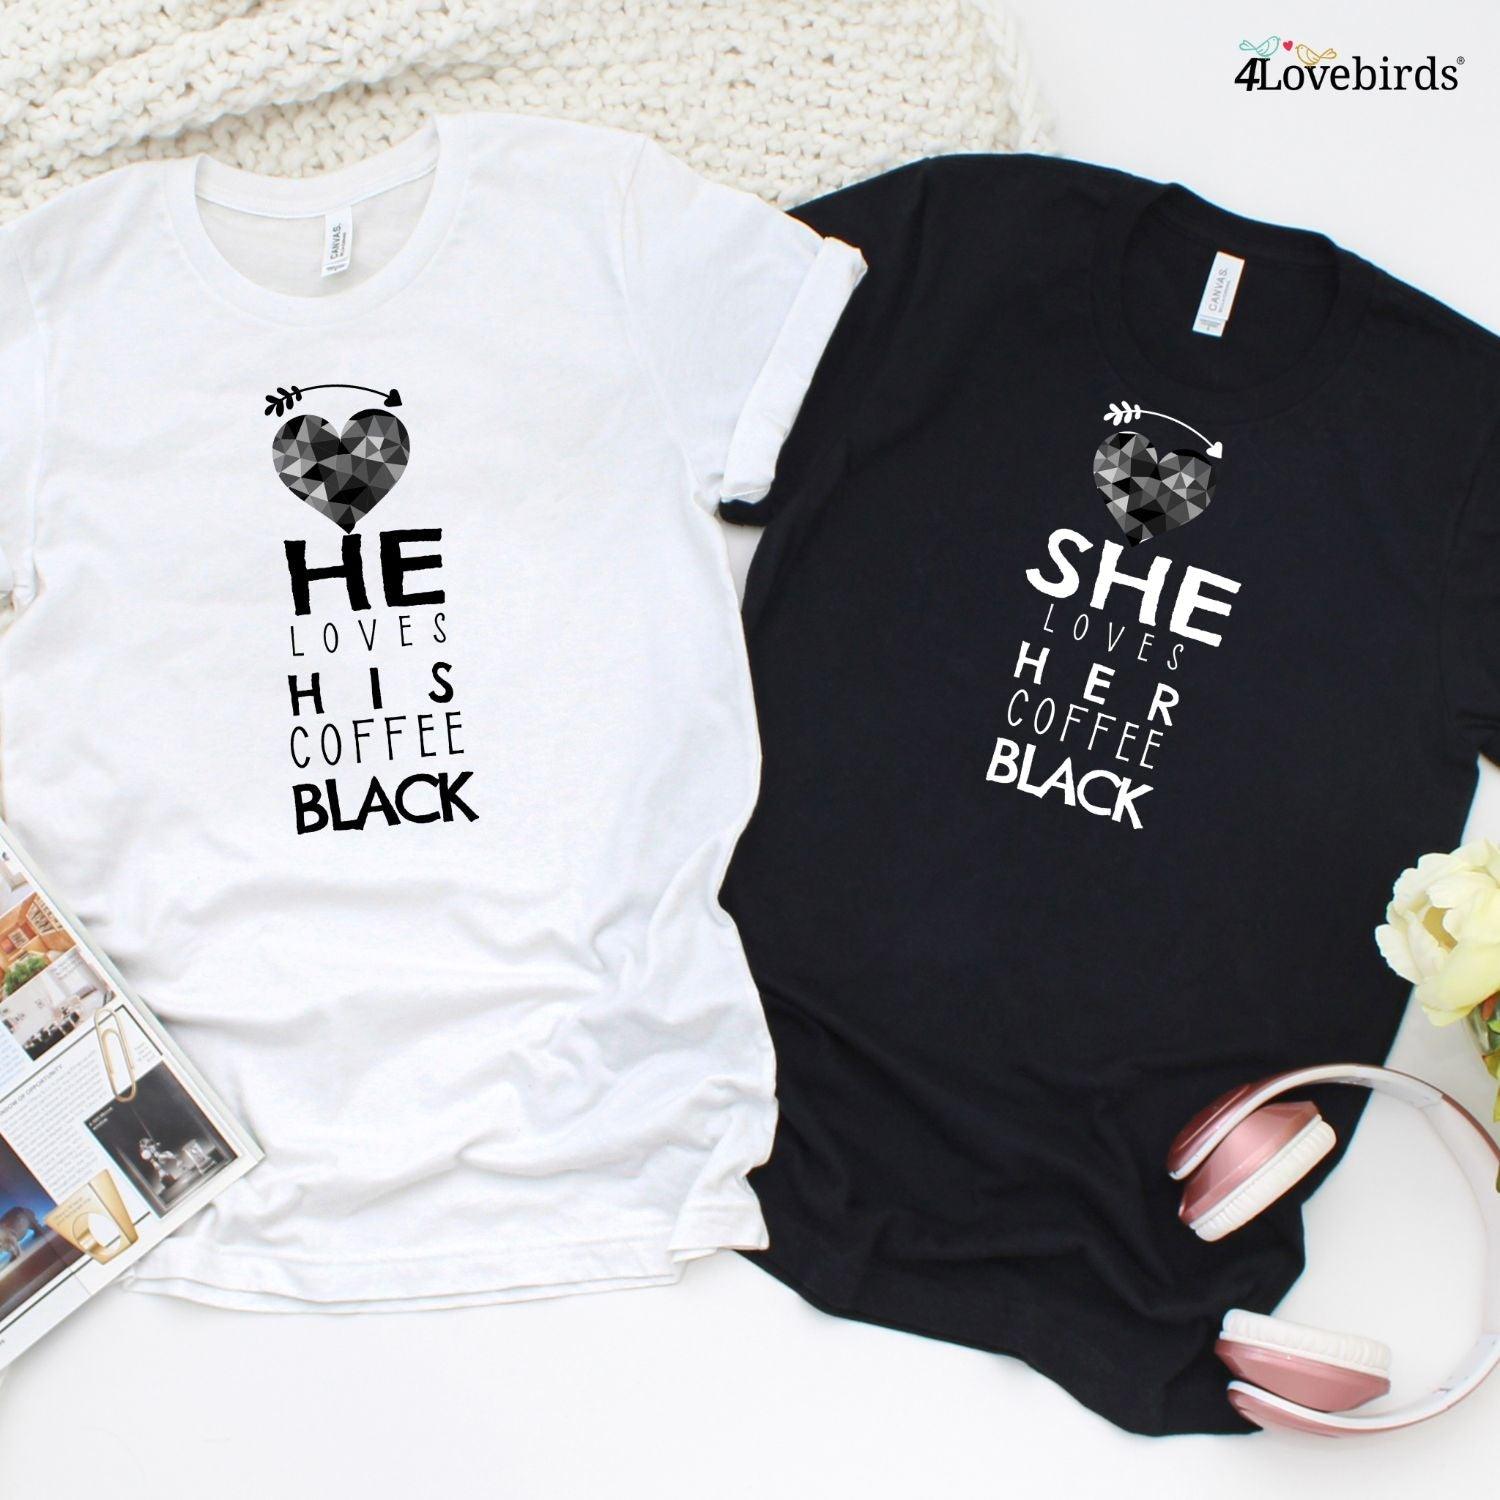 Matching Coffee Set for Couples: She/He Loves Coffee Black, Funny Gifts for Lovers - 4Lovebirds